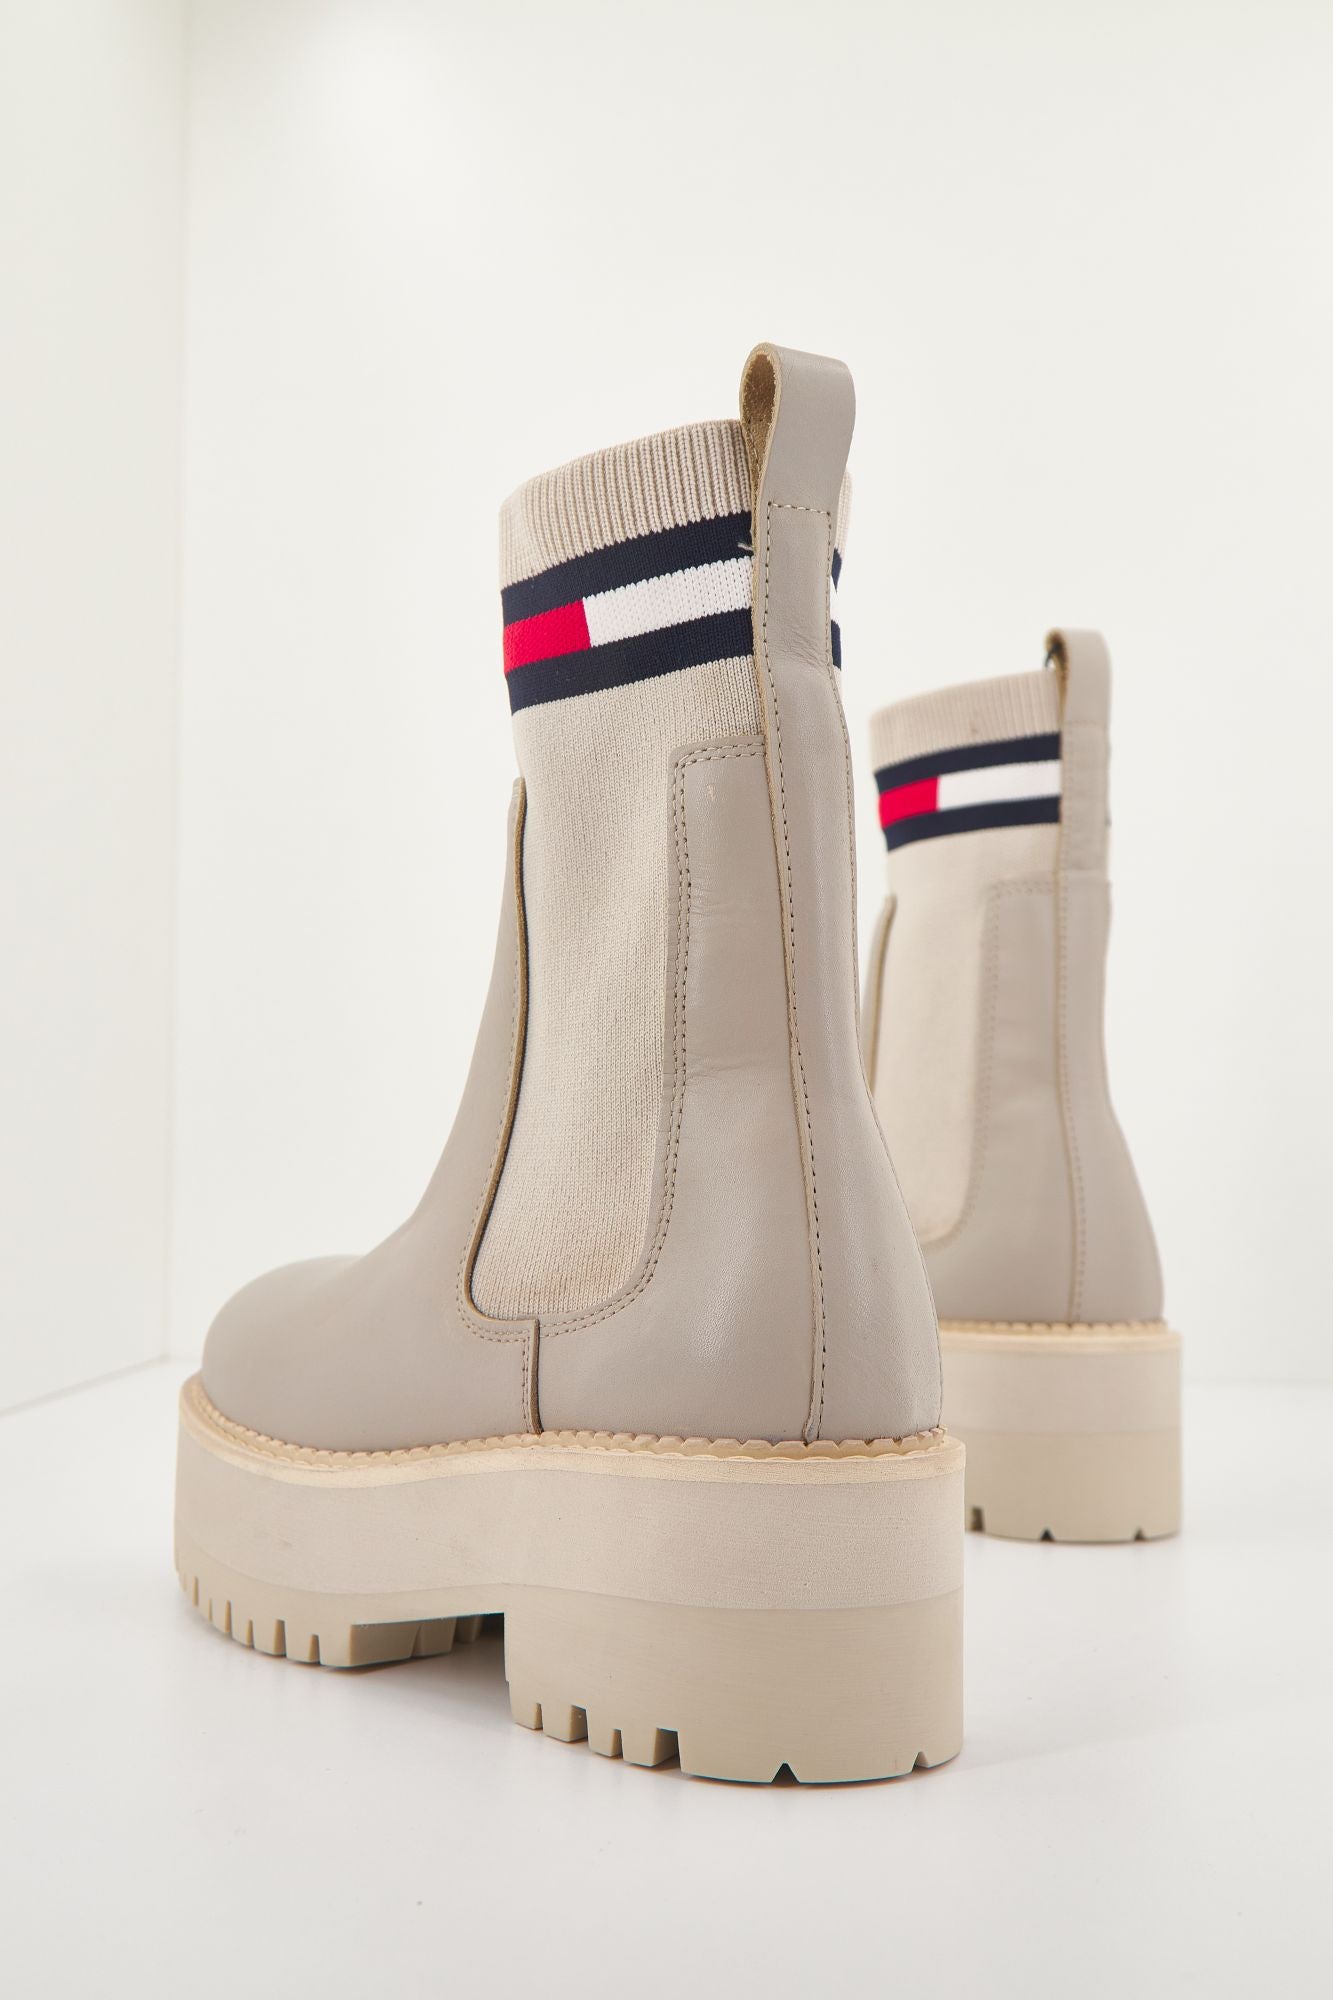 TOMMY JEANS TAMY HIGHER - 2A CHELSEA en color BEIS (3)